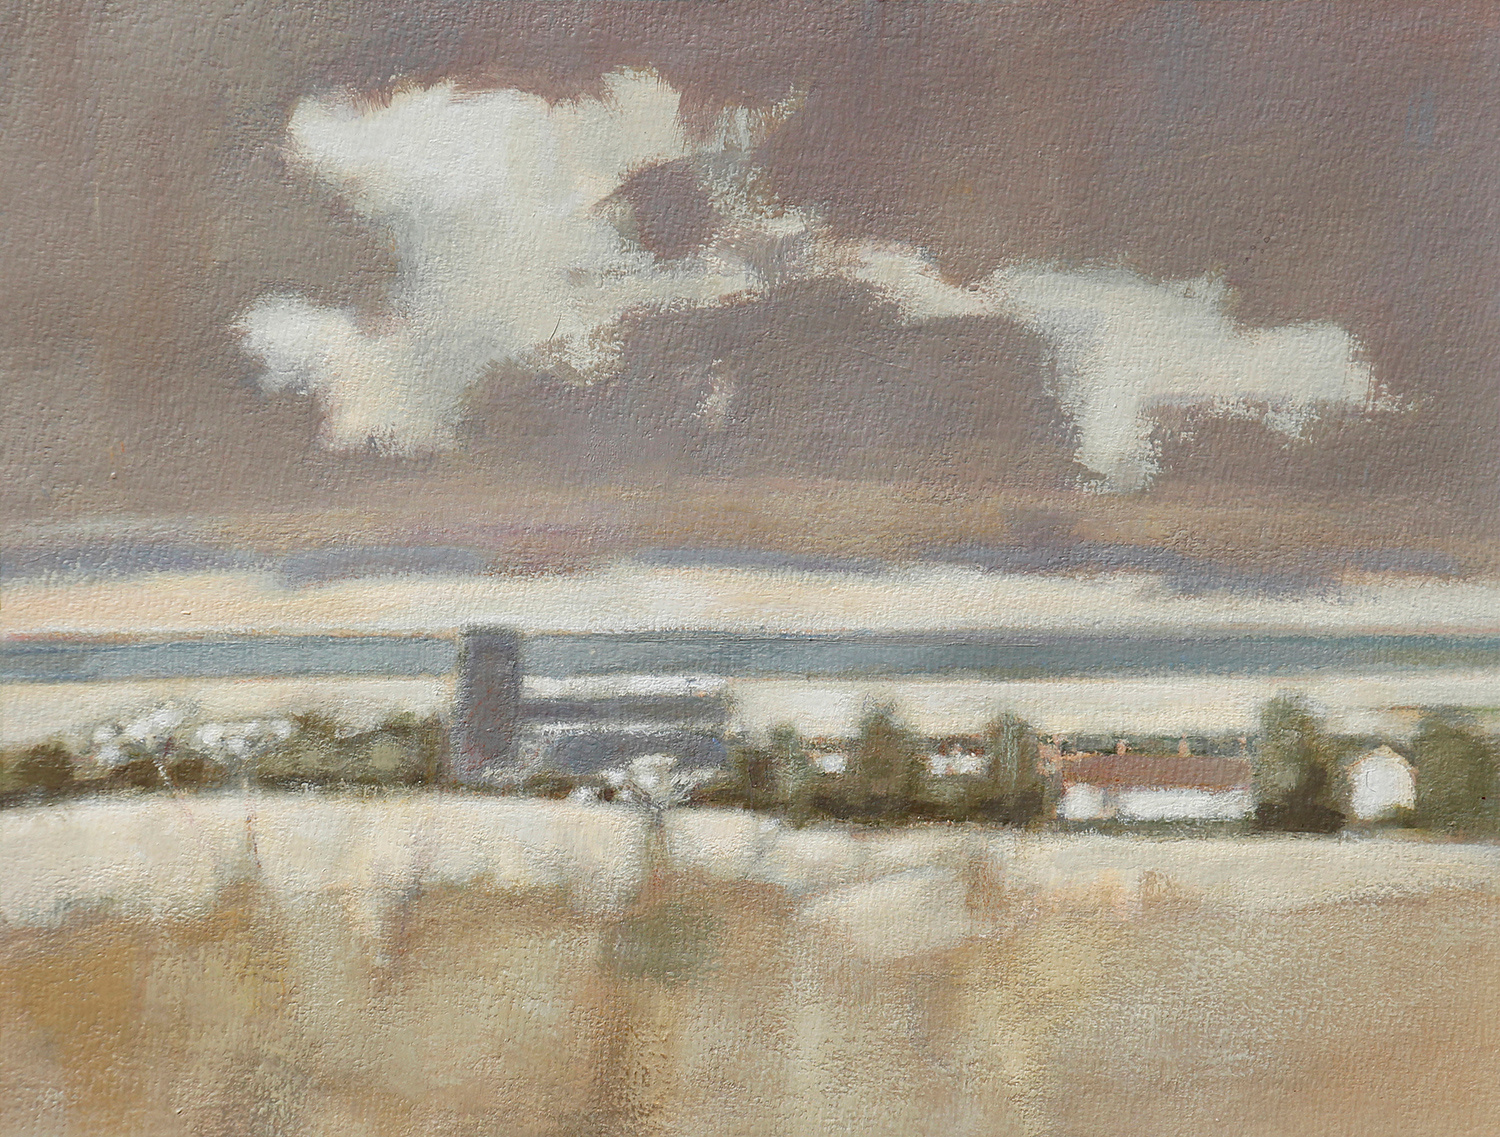 Looking to the Sea, Salthouse by John Newland